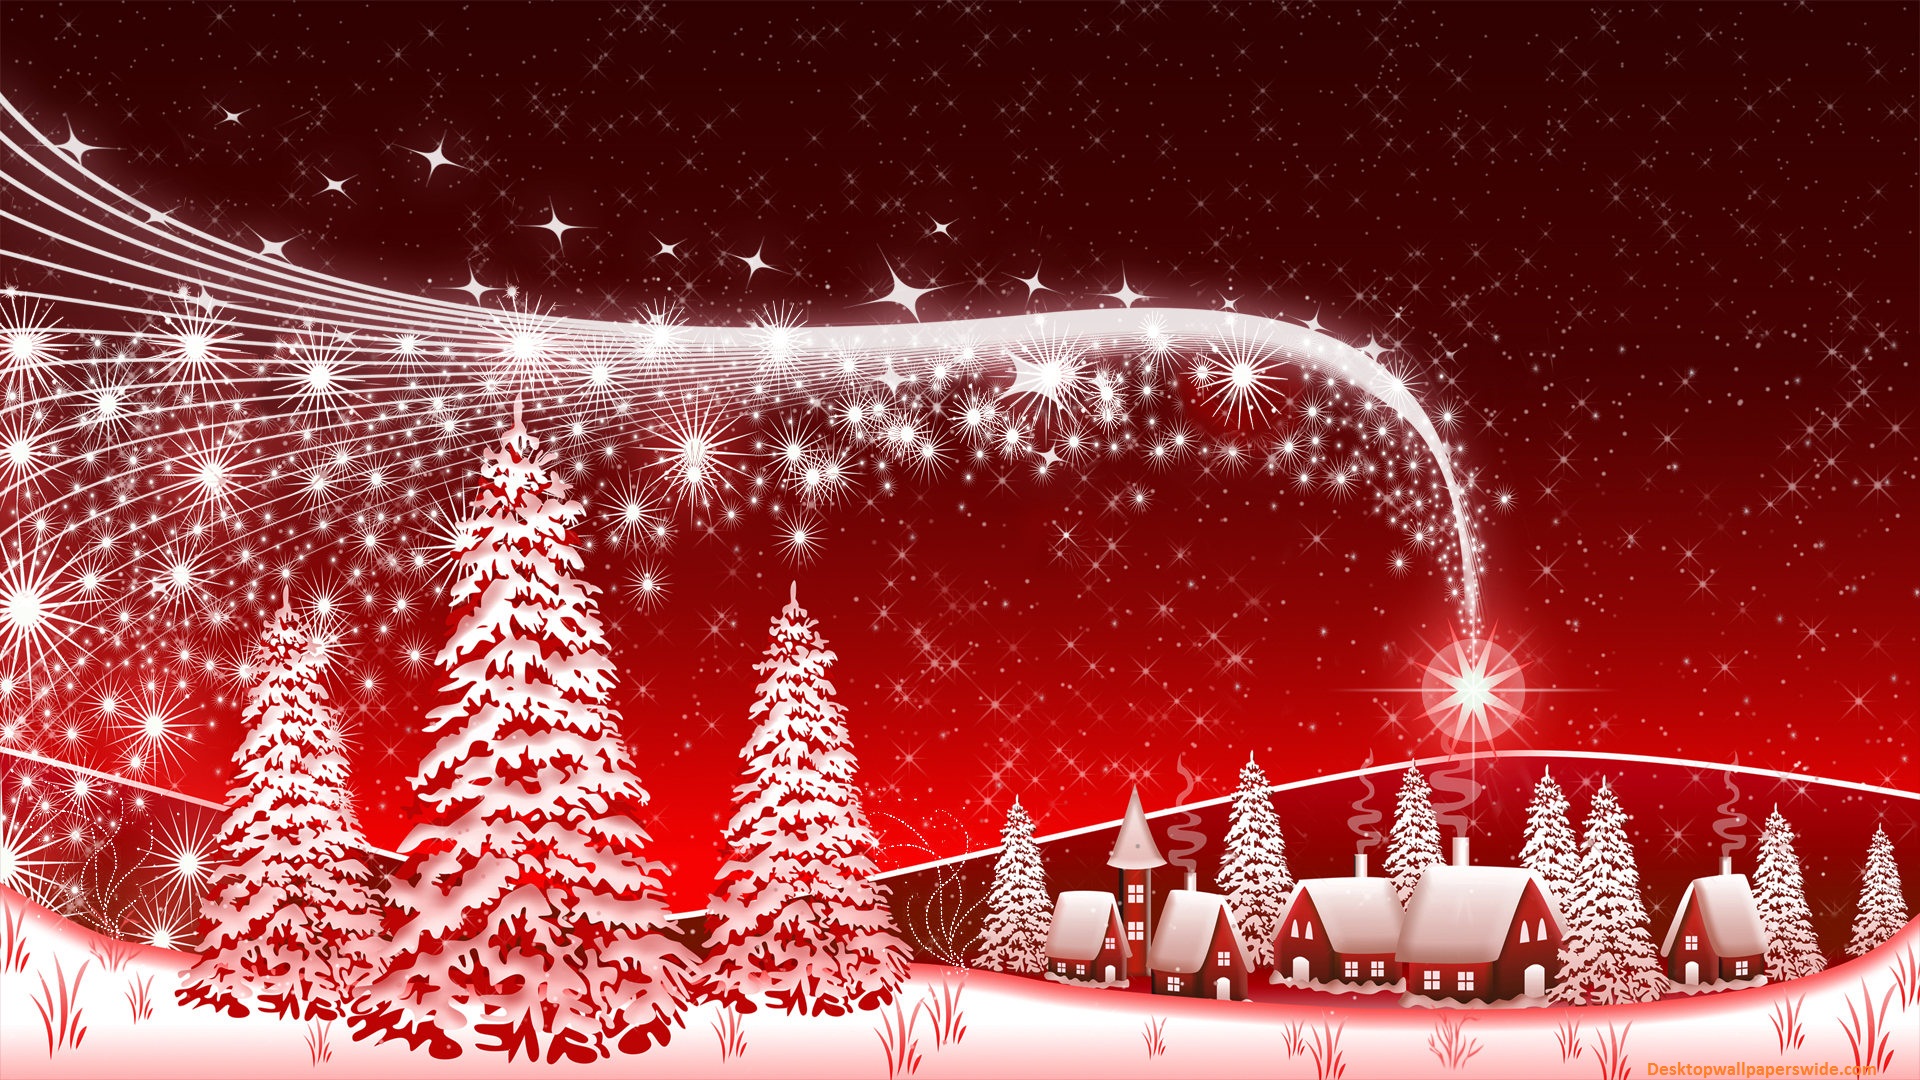 Merry christmas background wallpaper